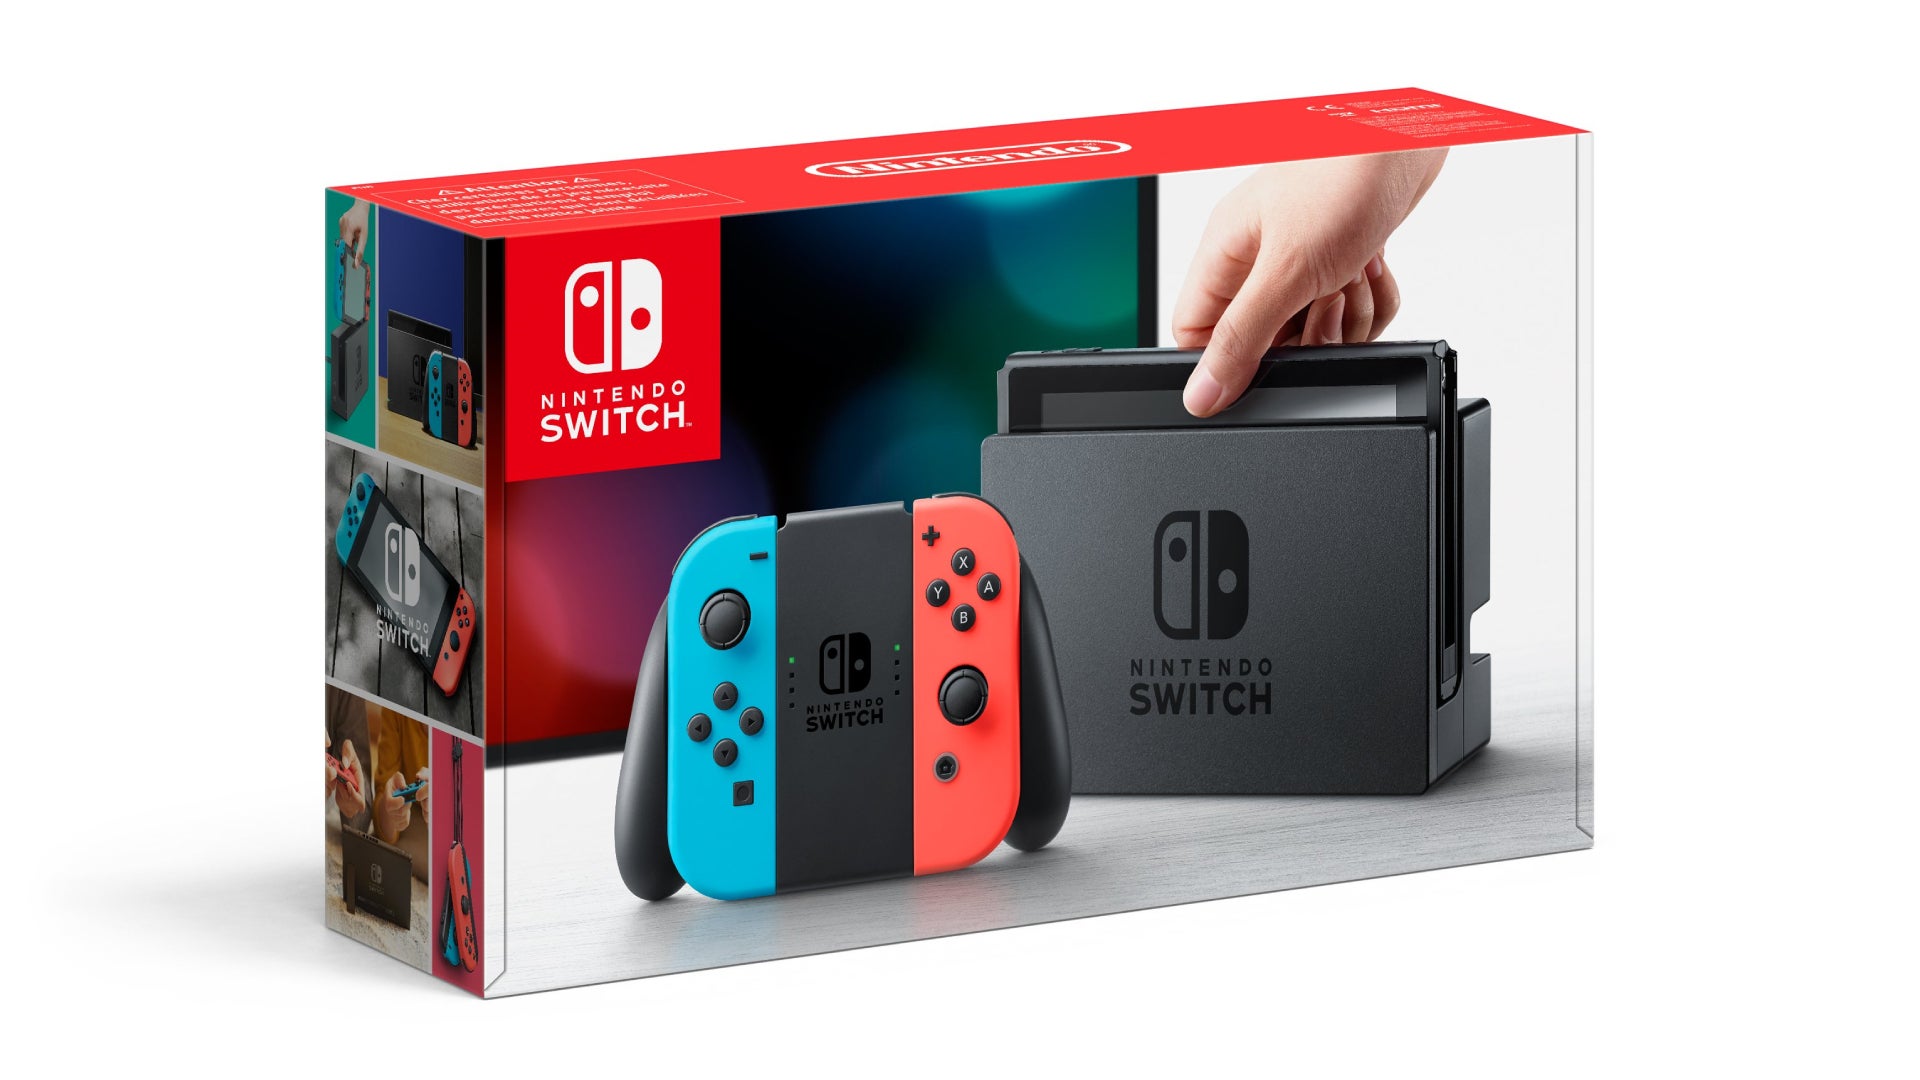 Get a new Nintendo Switch console for £230 at The Game Collection 